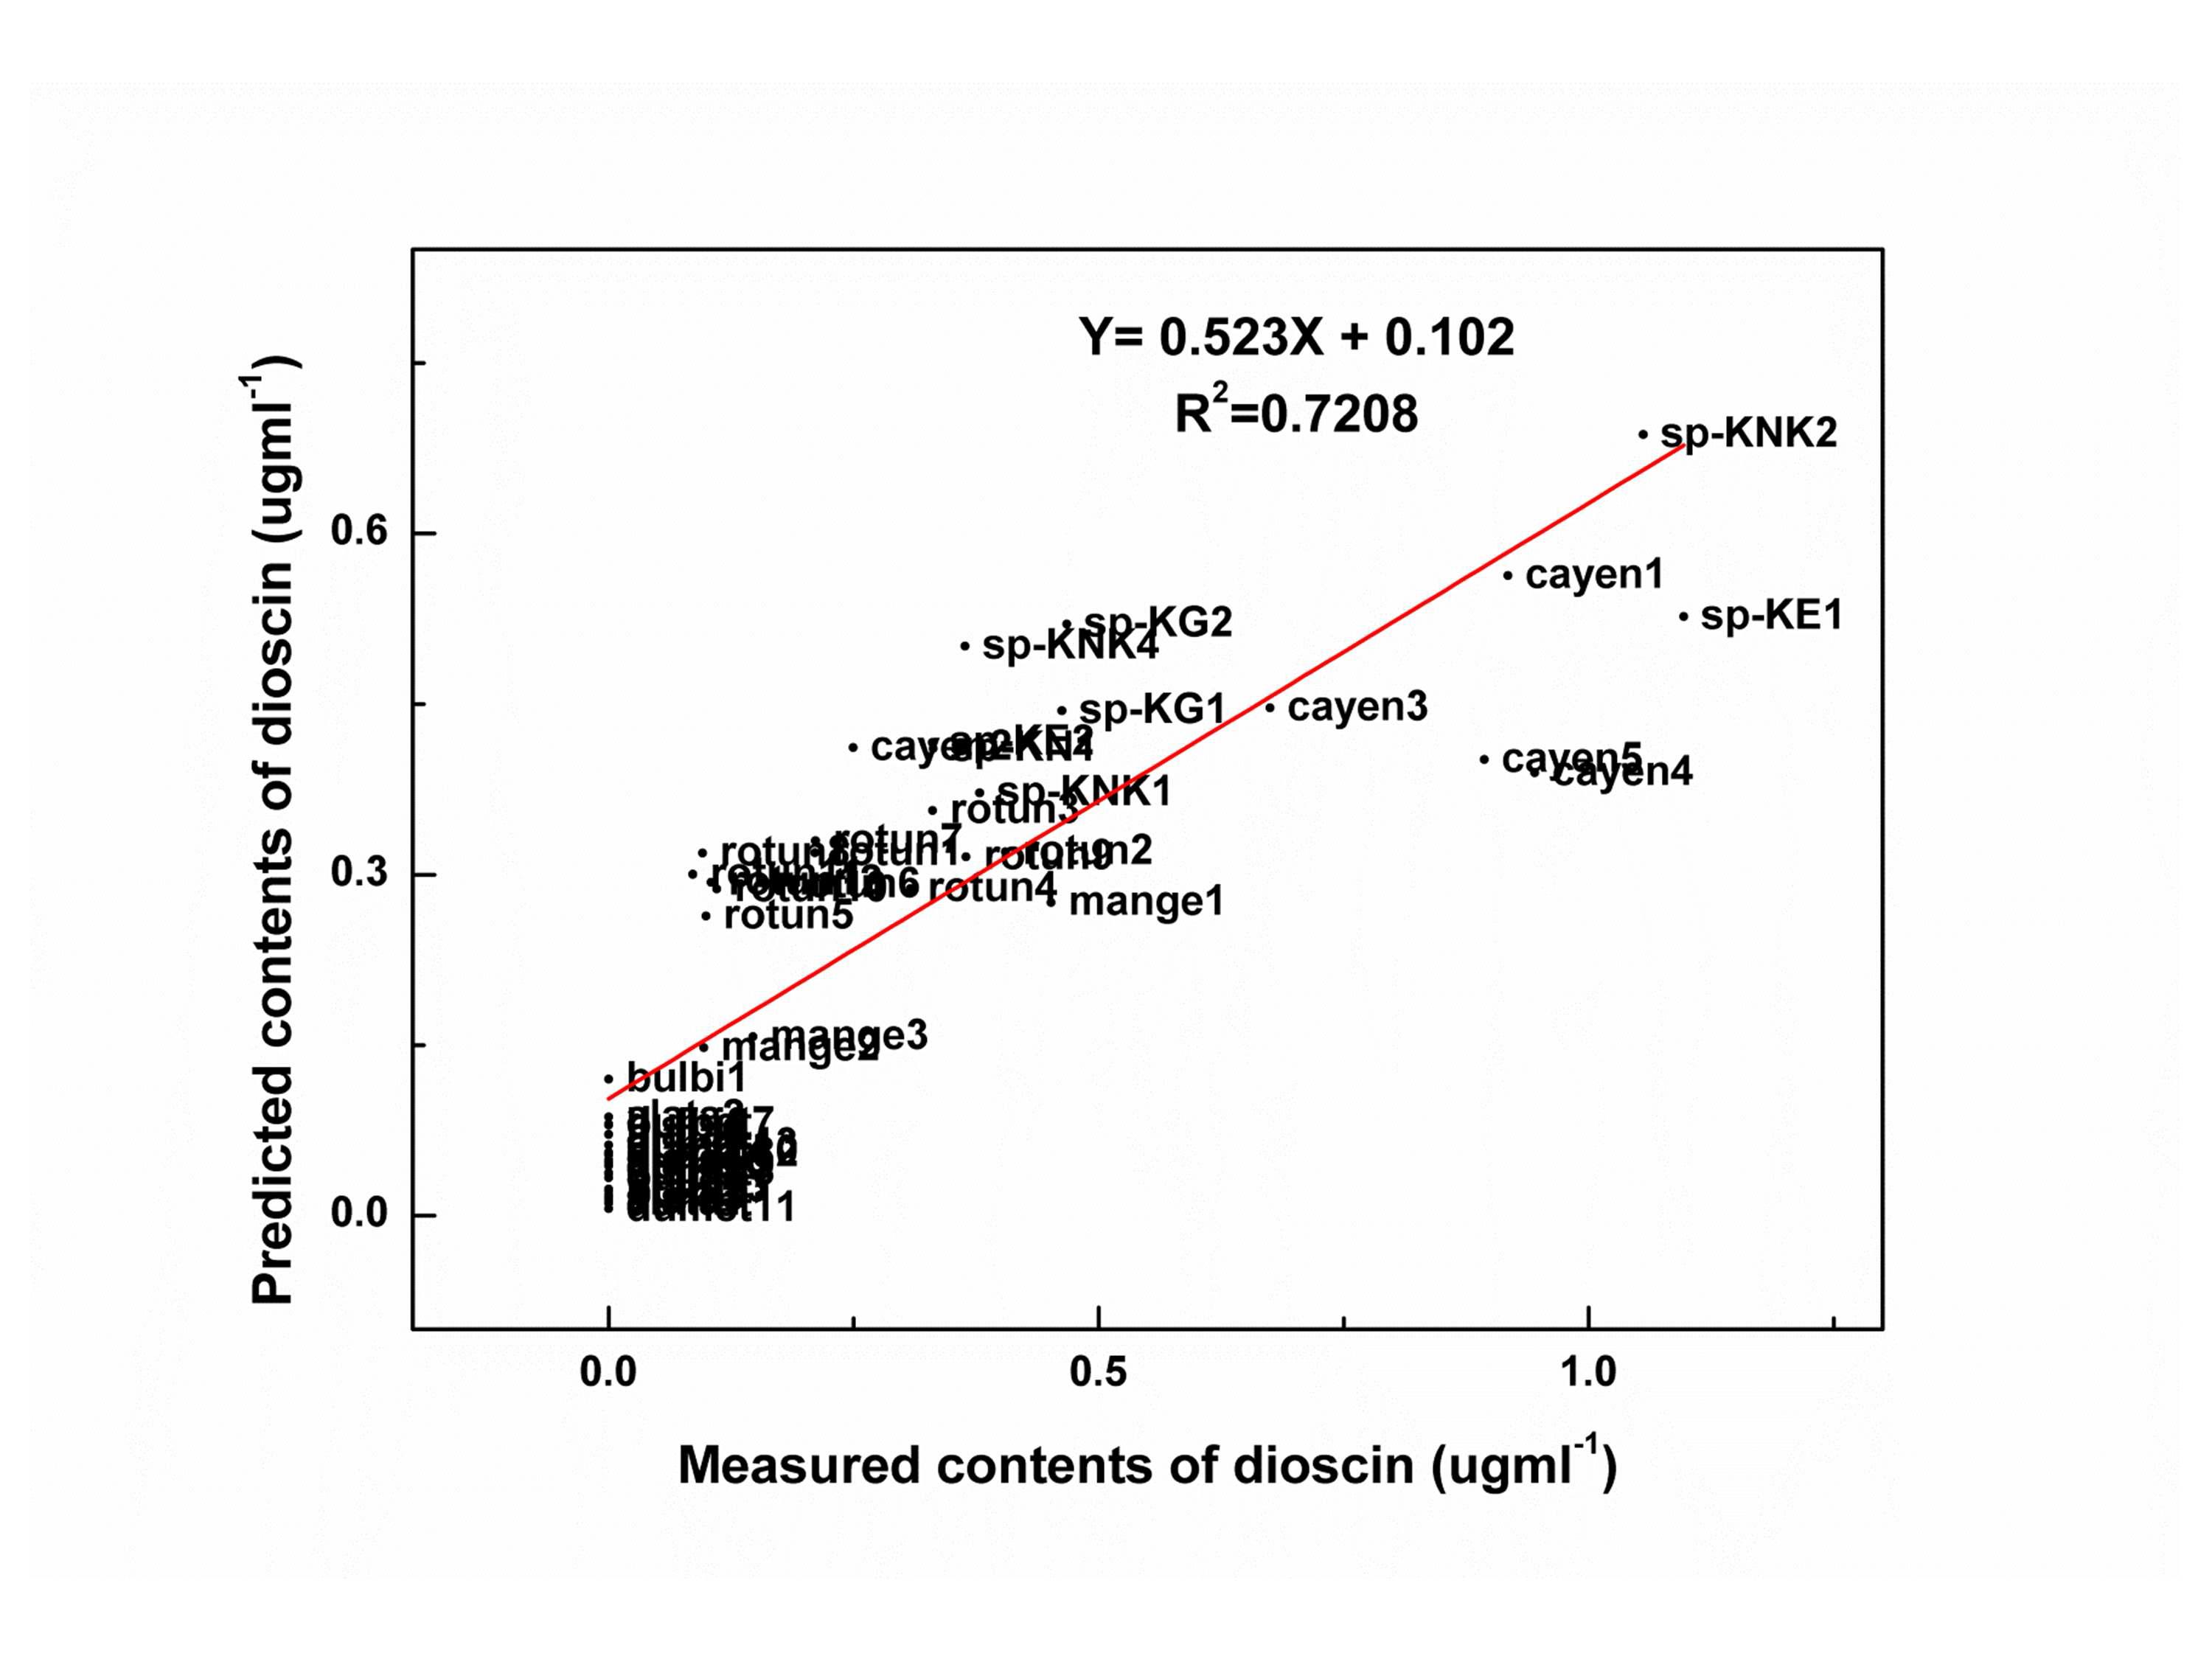 Linear regression plot between predicted dioscin content by the PLS regression model from the FT-IR spectral data and measure dioscin content by HPLC analysis. Dots represent yam tuber samples. Letters and numbers represent each African yam sample groups and its individual samples. Regression formula and coefficient (R2 = 0.7208) are displayed.